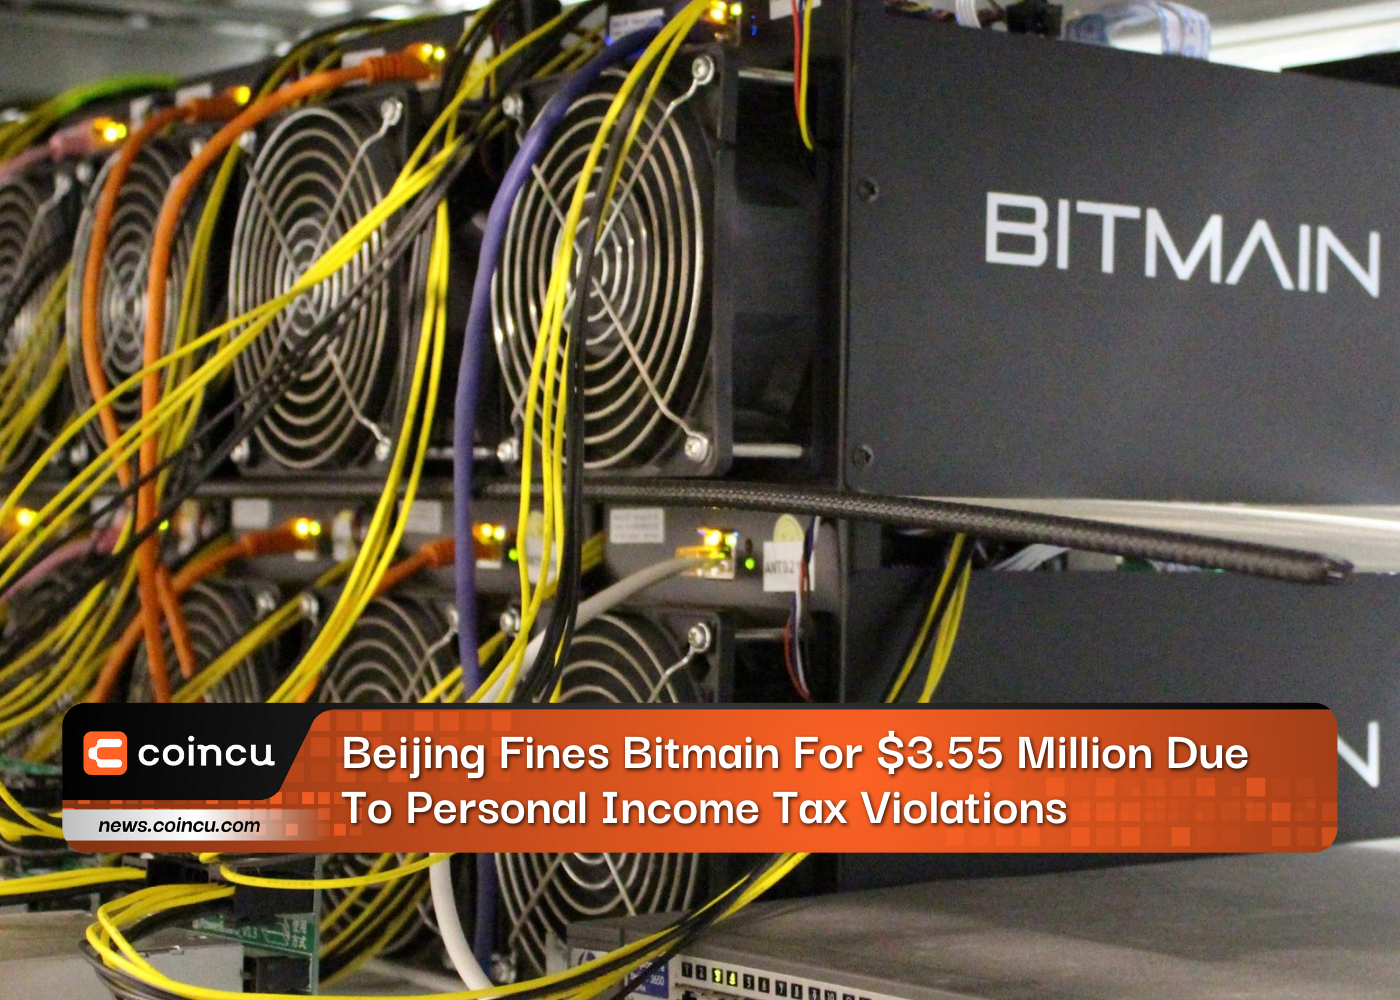 Beijing Fines Bitmain For $3.55 Million Due To Personal Income Tax Violations